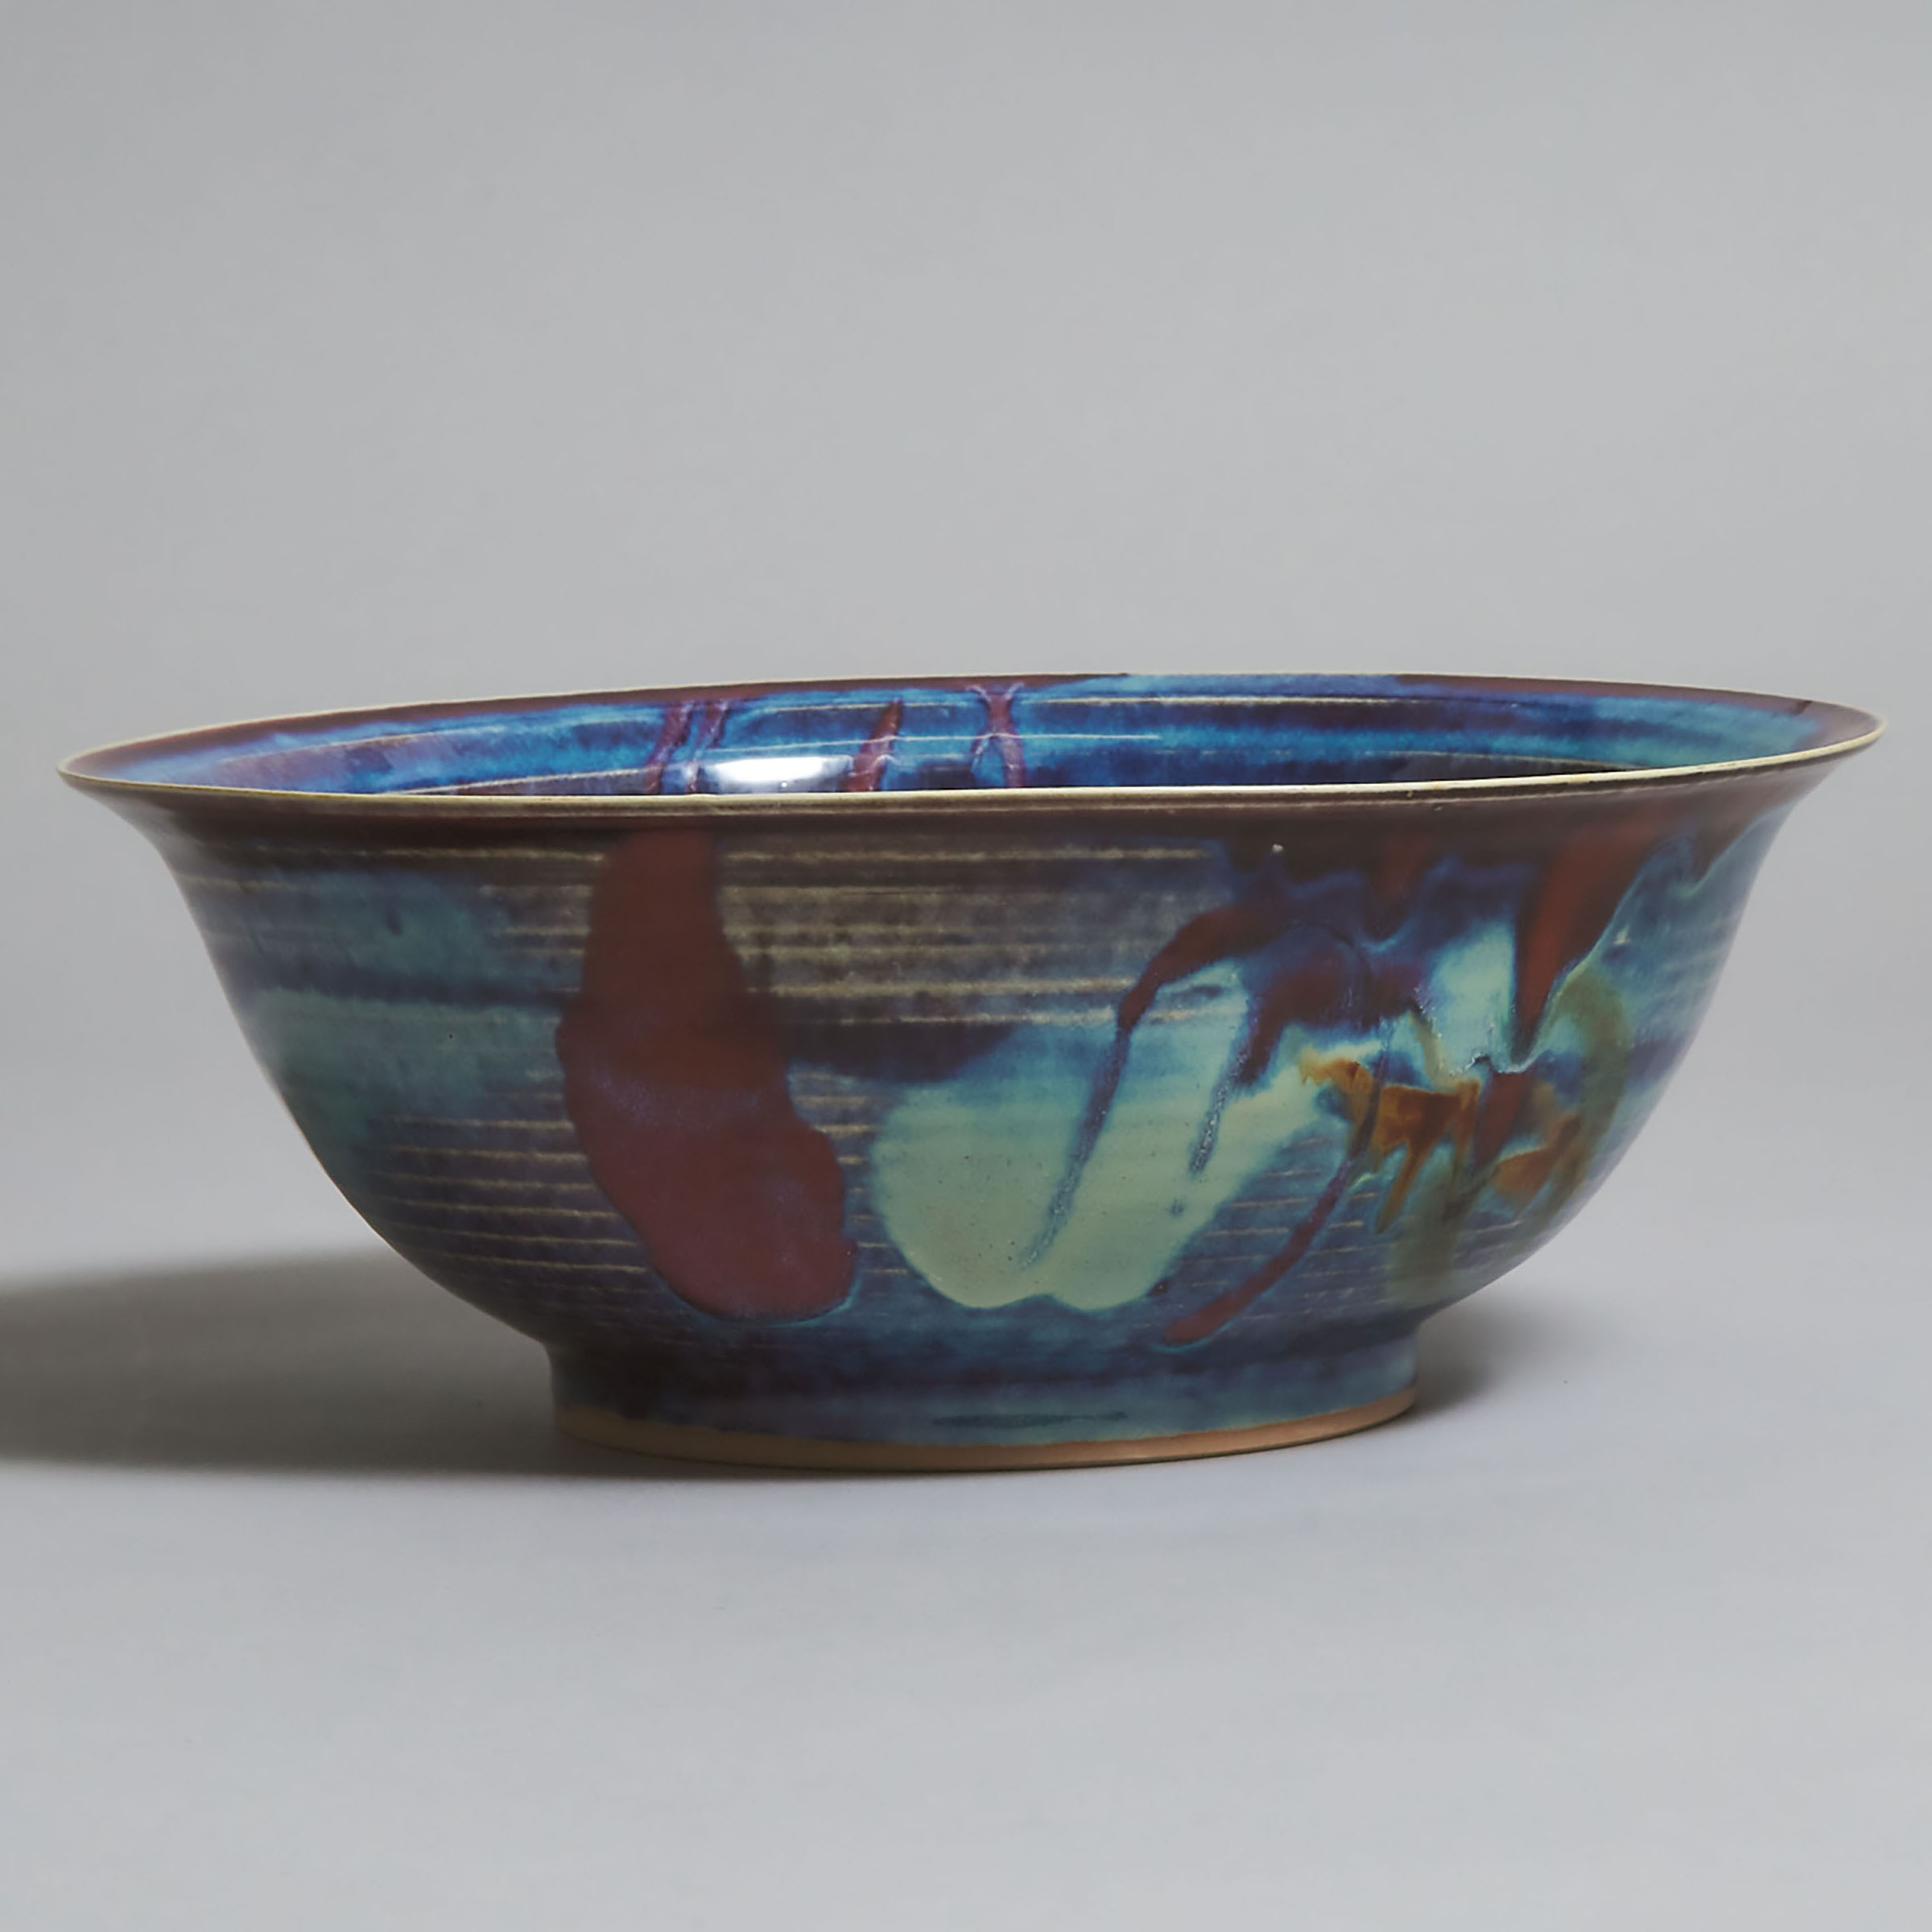 Kayo O'Young (Canadian, b.1950), Blue and Red Glazed Bowl, 1997